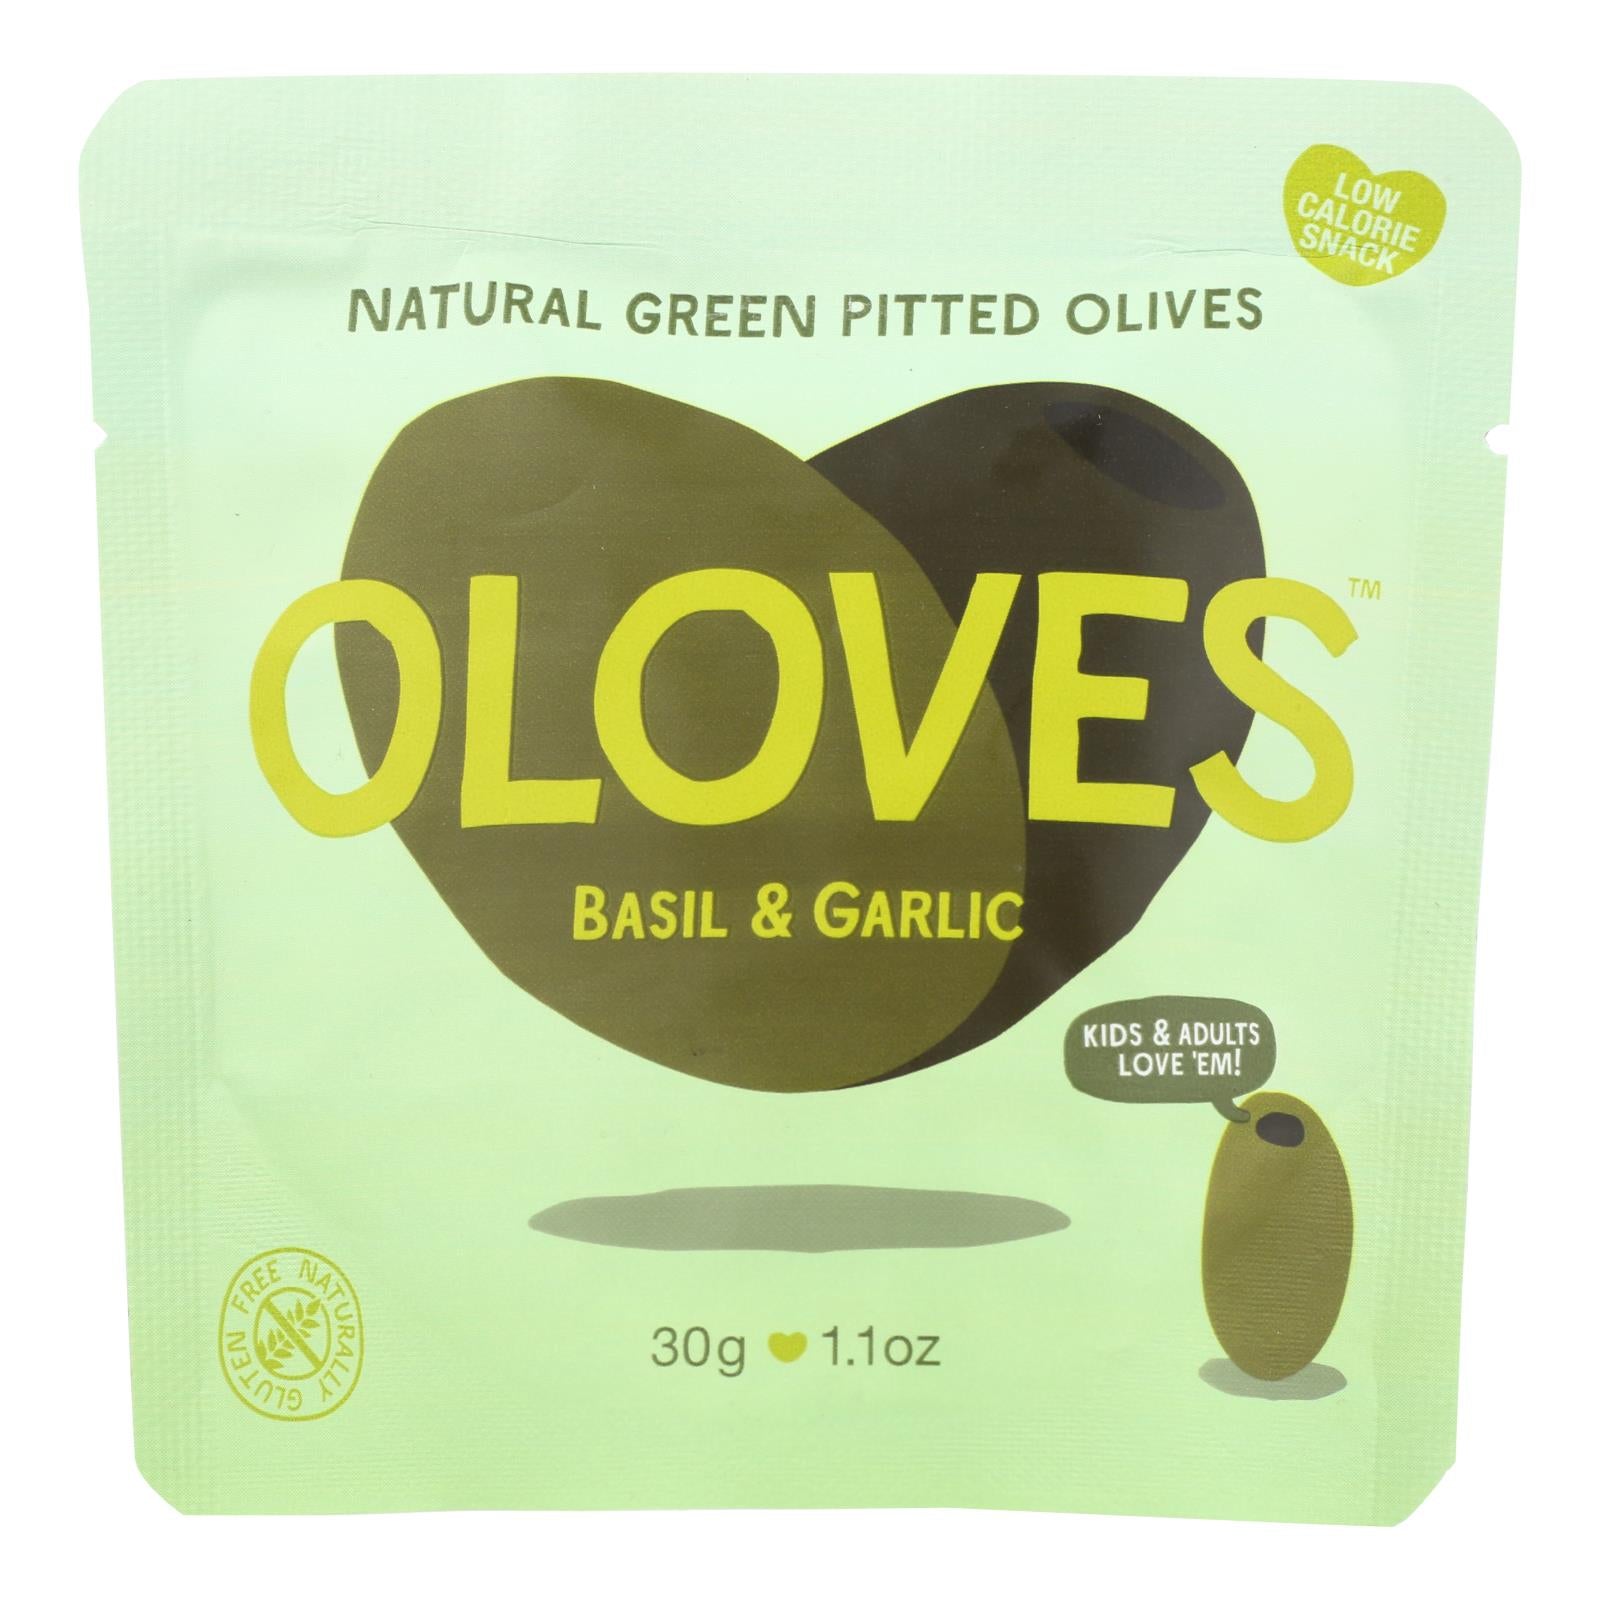 Oloves Green Pitted Olives - Basil And Garlic - Case Of 10 - 1.1 Oz.